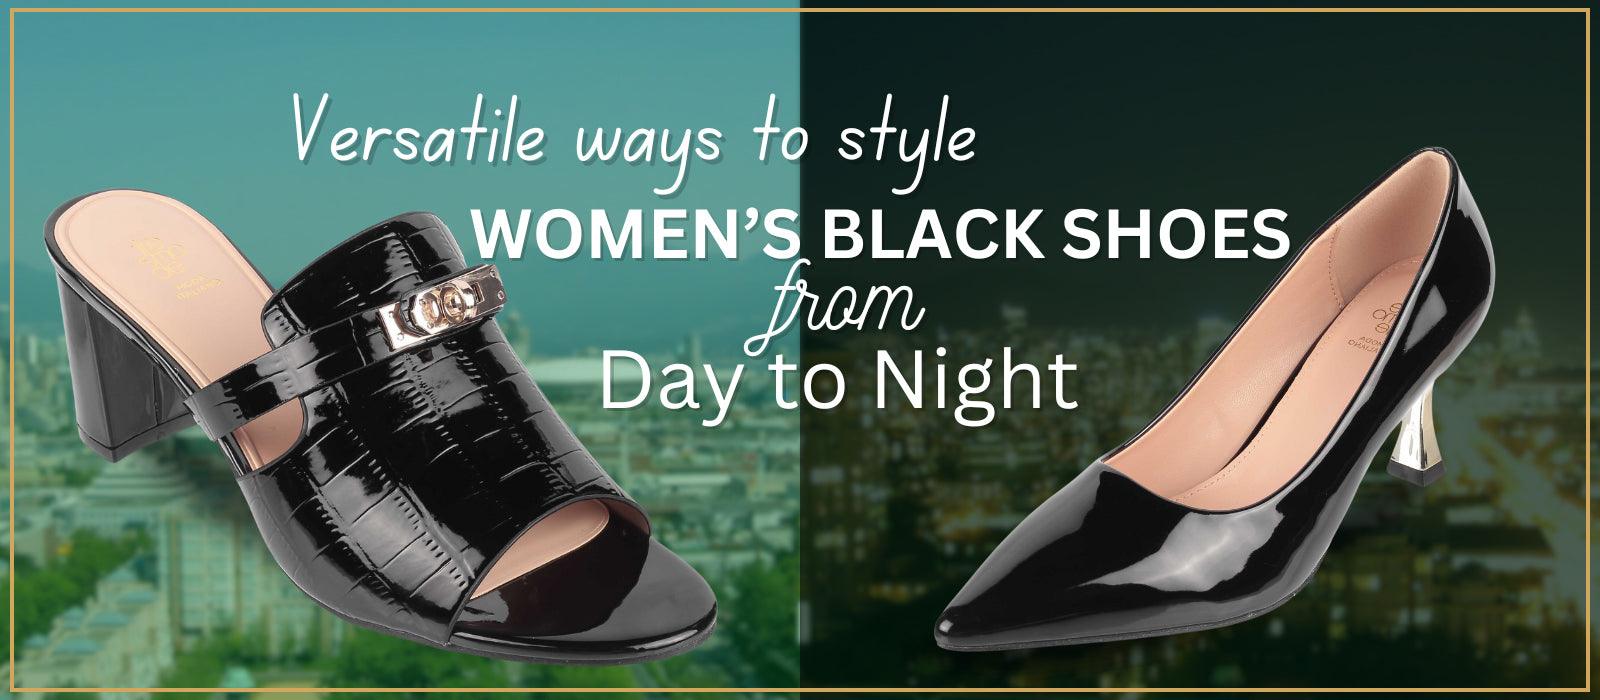 How to wear black shoes – A Guide for women